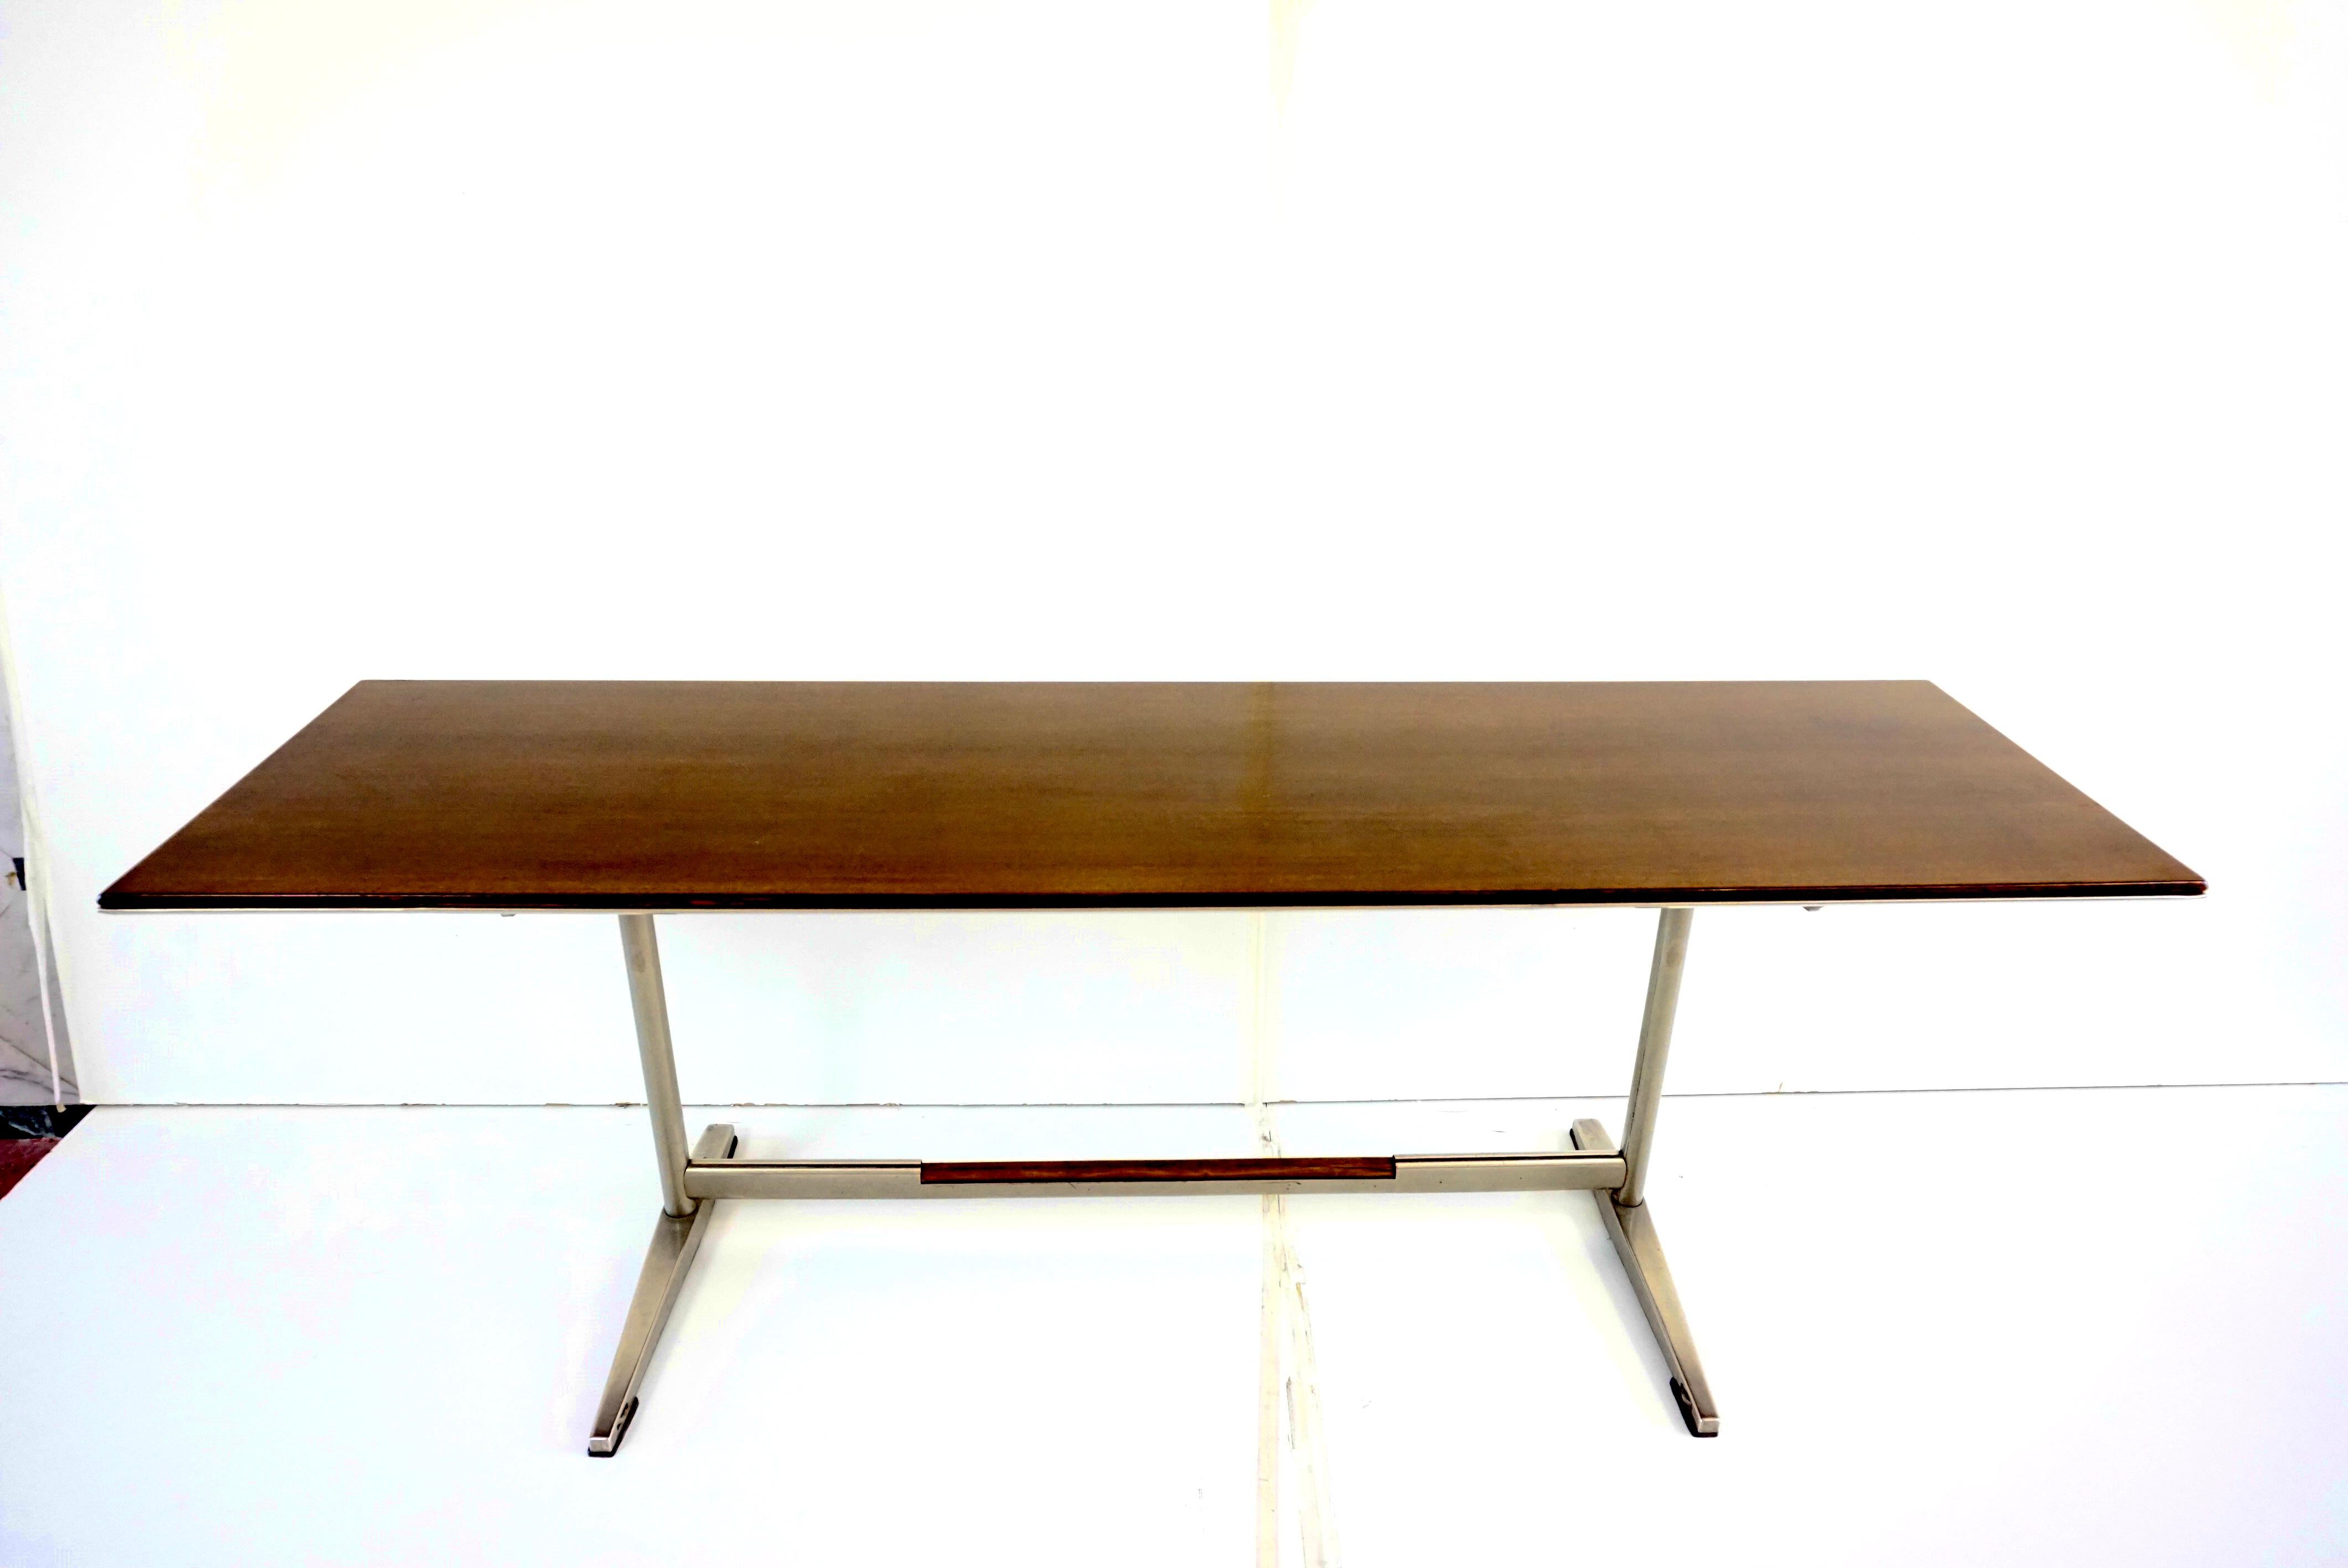 Rare executive large desk by Gio Ponti for the Pirelli Tower in Milano 1961
Executed by RIMA PADOVA ITALY
This model is very rare for the dimension, very large and not very wide (210cm and 60cm ) 
Used also as a consolle table 
Walnut ( mahogany